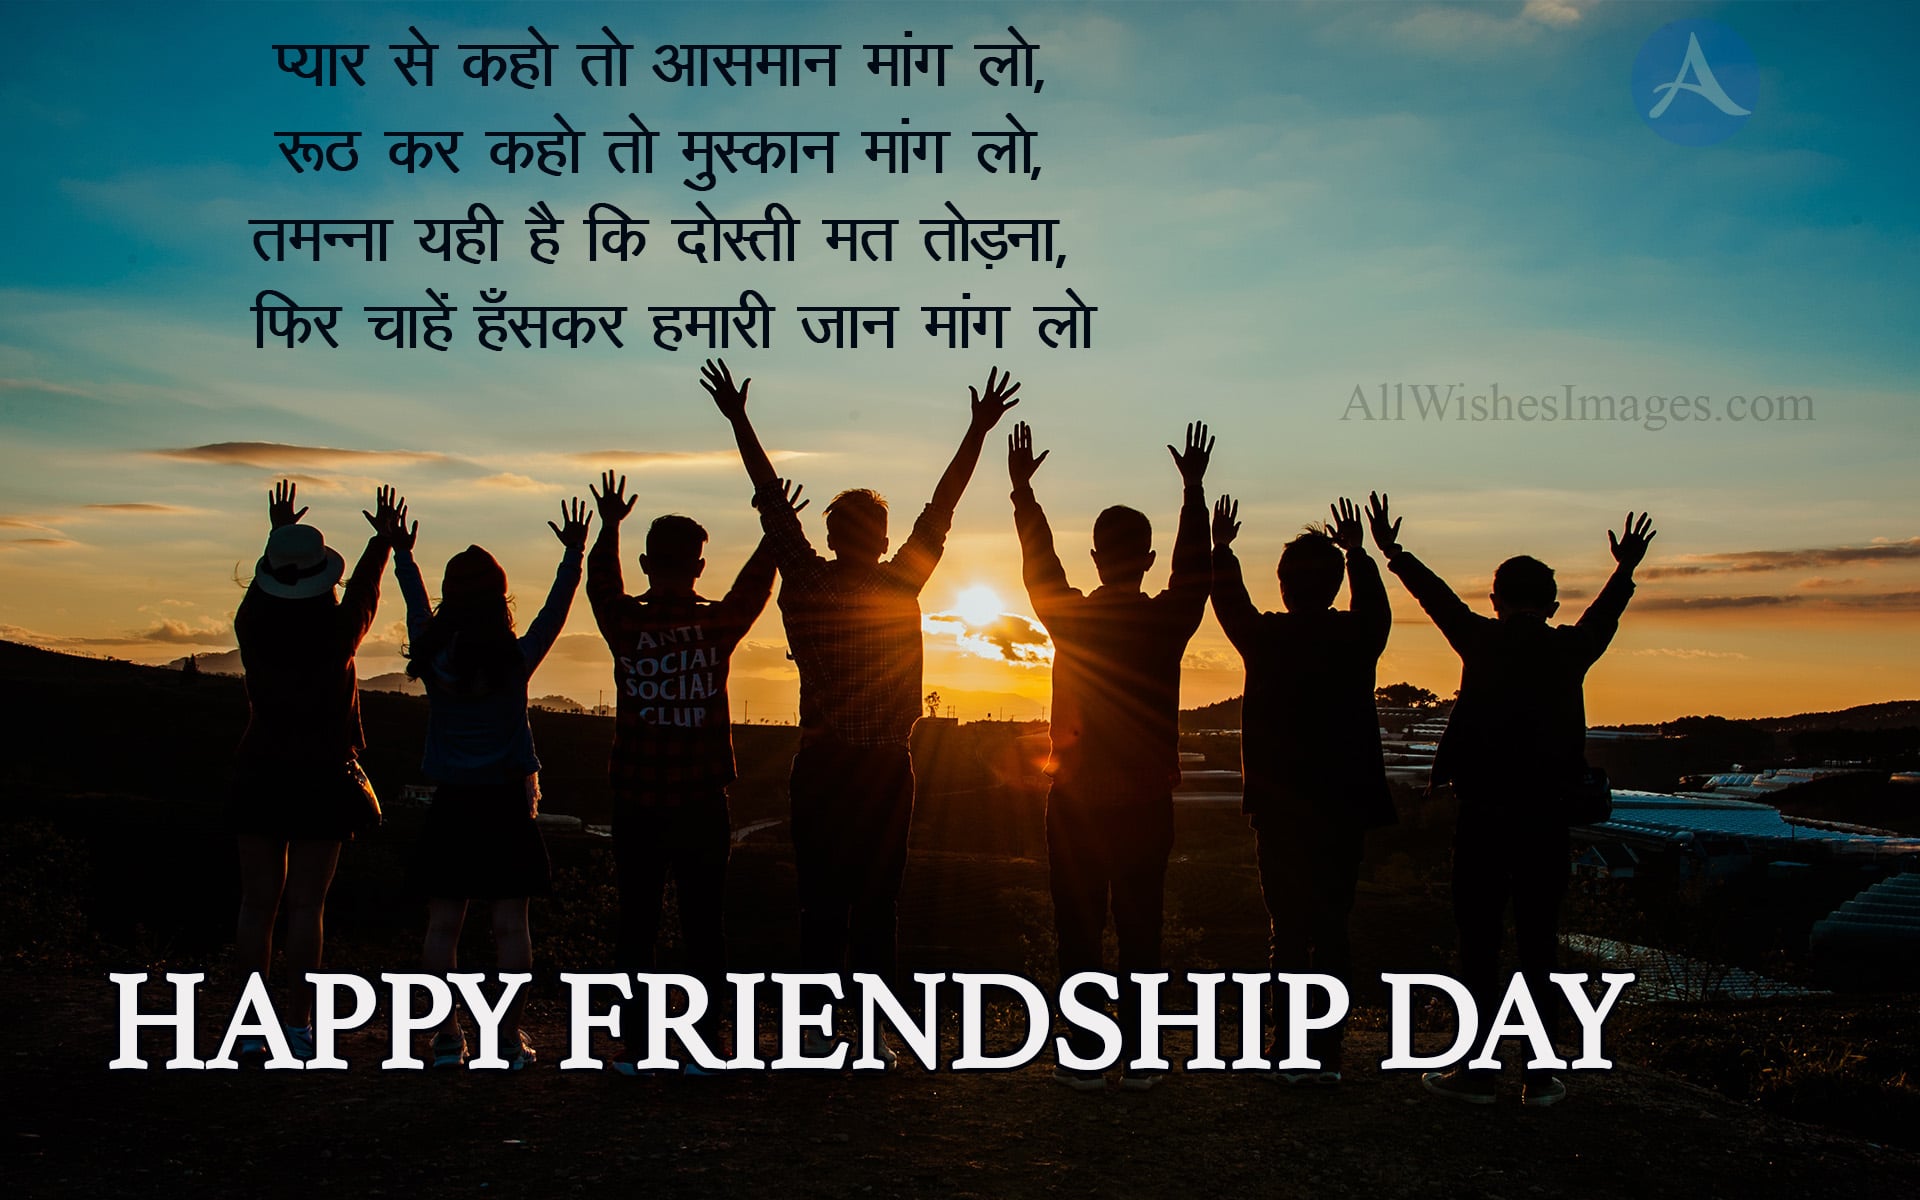 Best friendship day shayari in hindi - All Wishes Images - Images for  WhatsApp